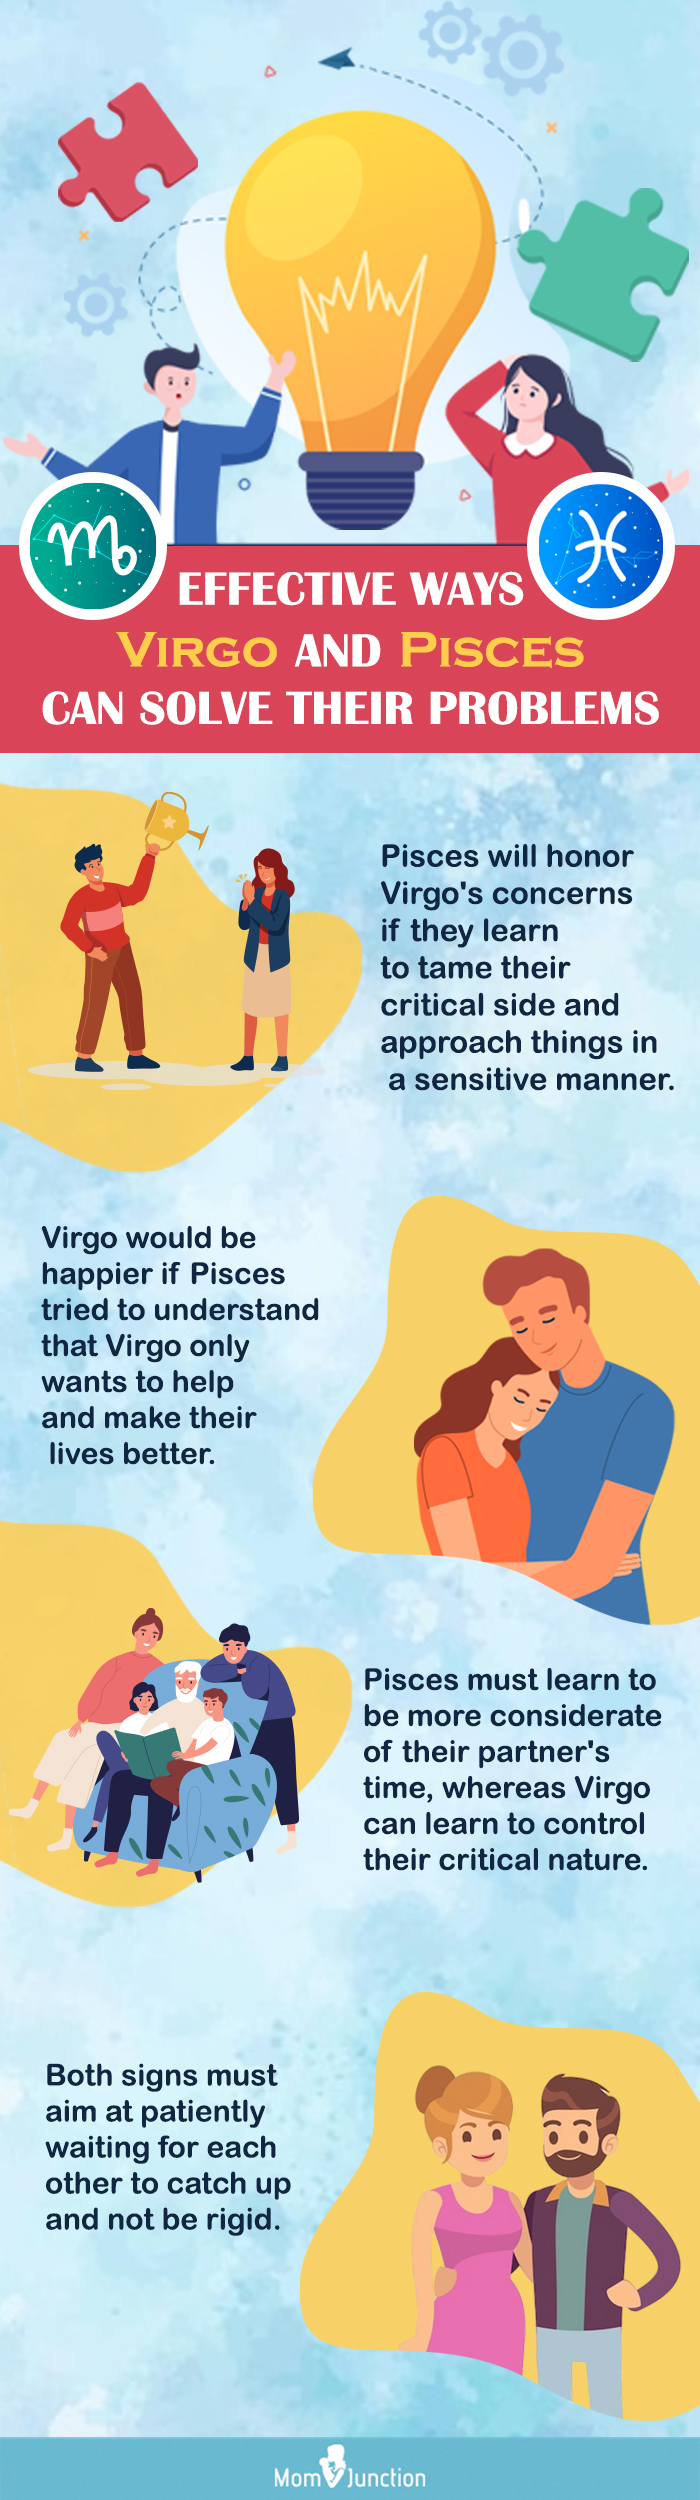 how can a virgo pisces relationship overcome their differences (infographic)